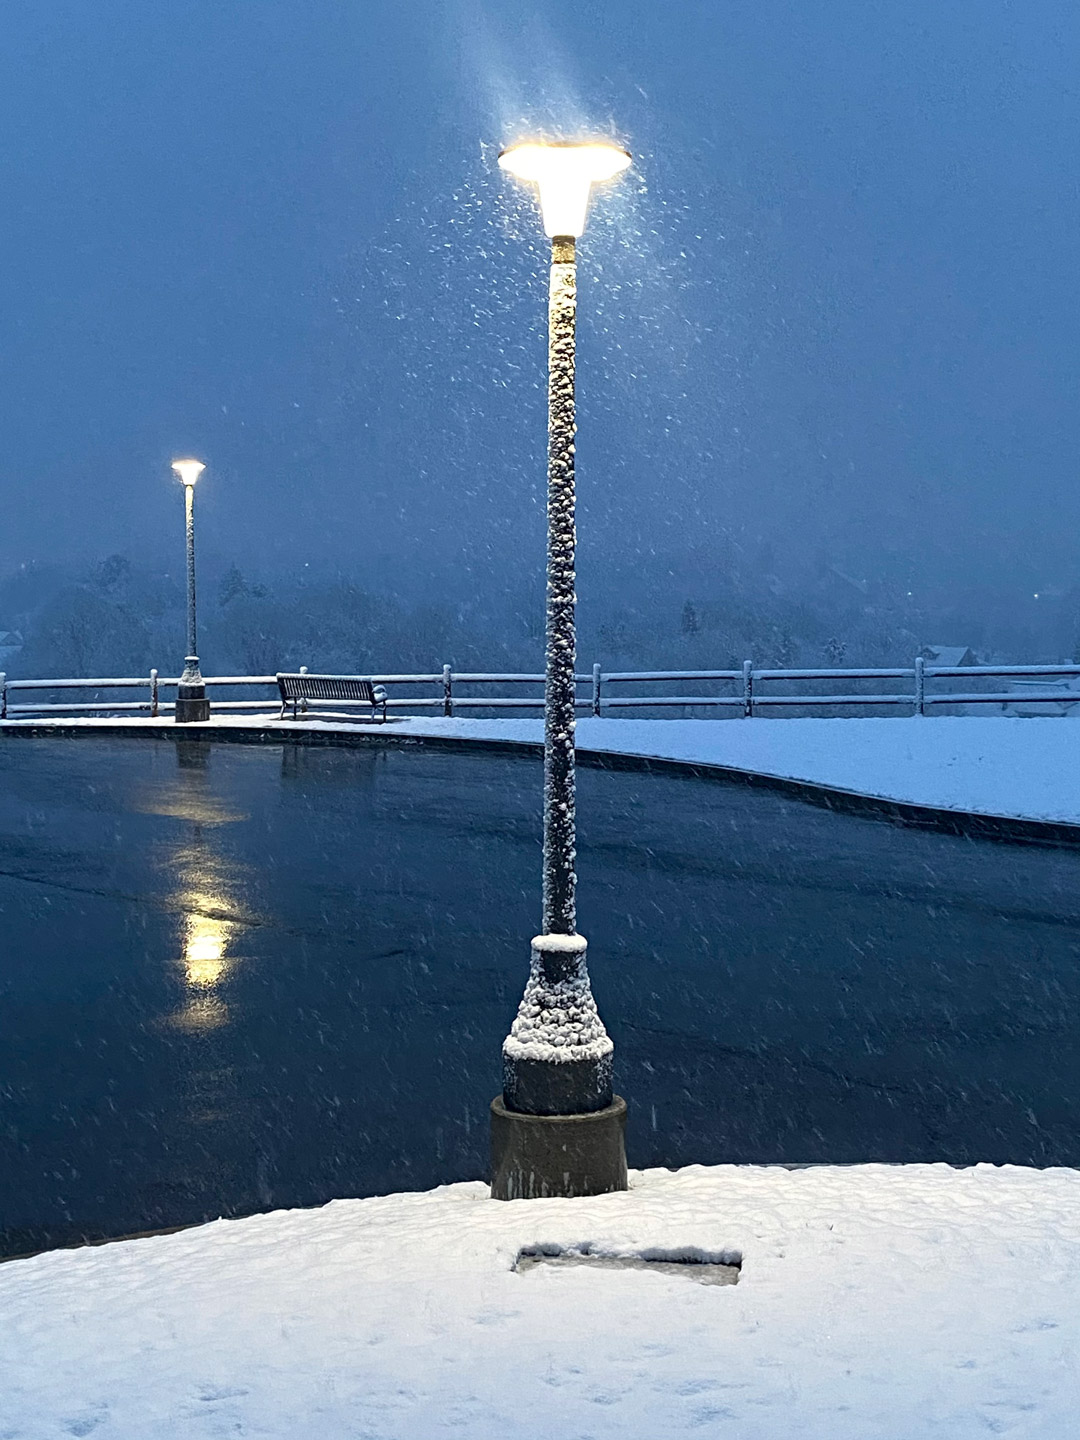 Two light poles, next to a glossy water-like parking lot, coated in fluffy snowflakes.